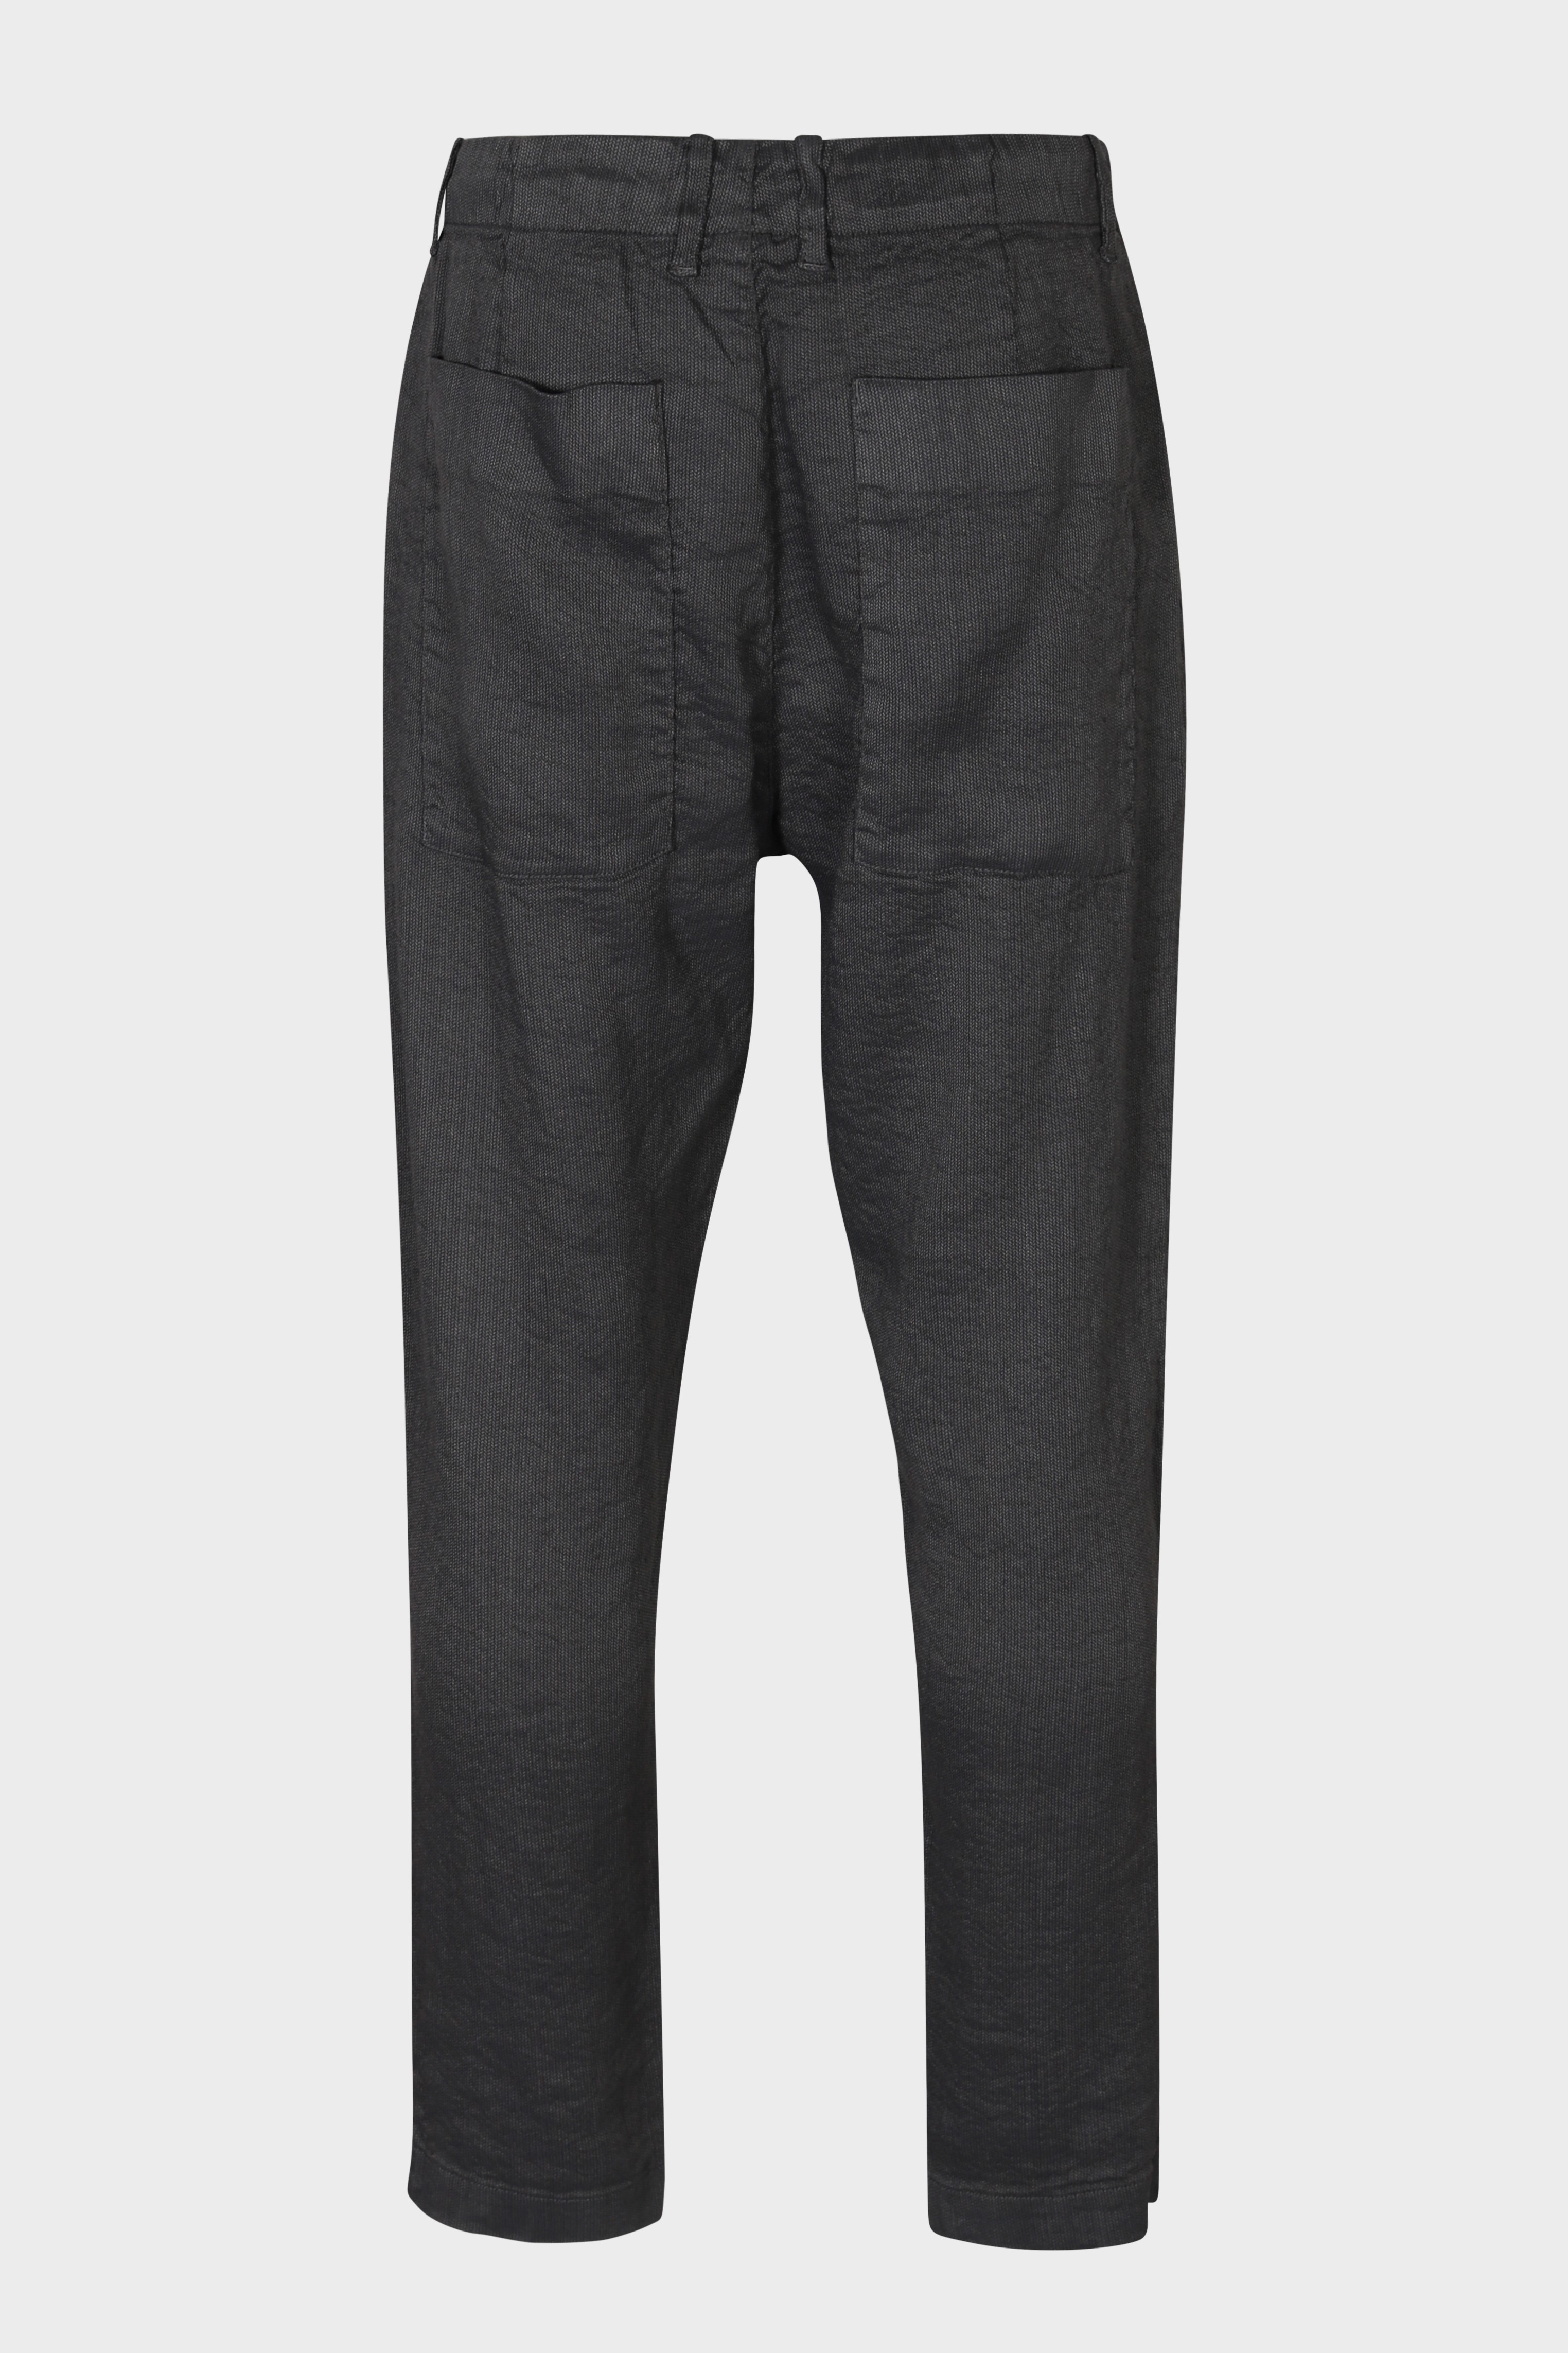 TRANSIT UOMO Structure Stretch Pant in Charcoal S